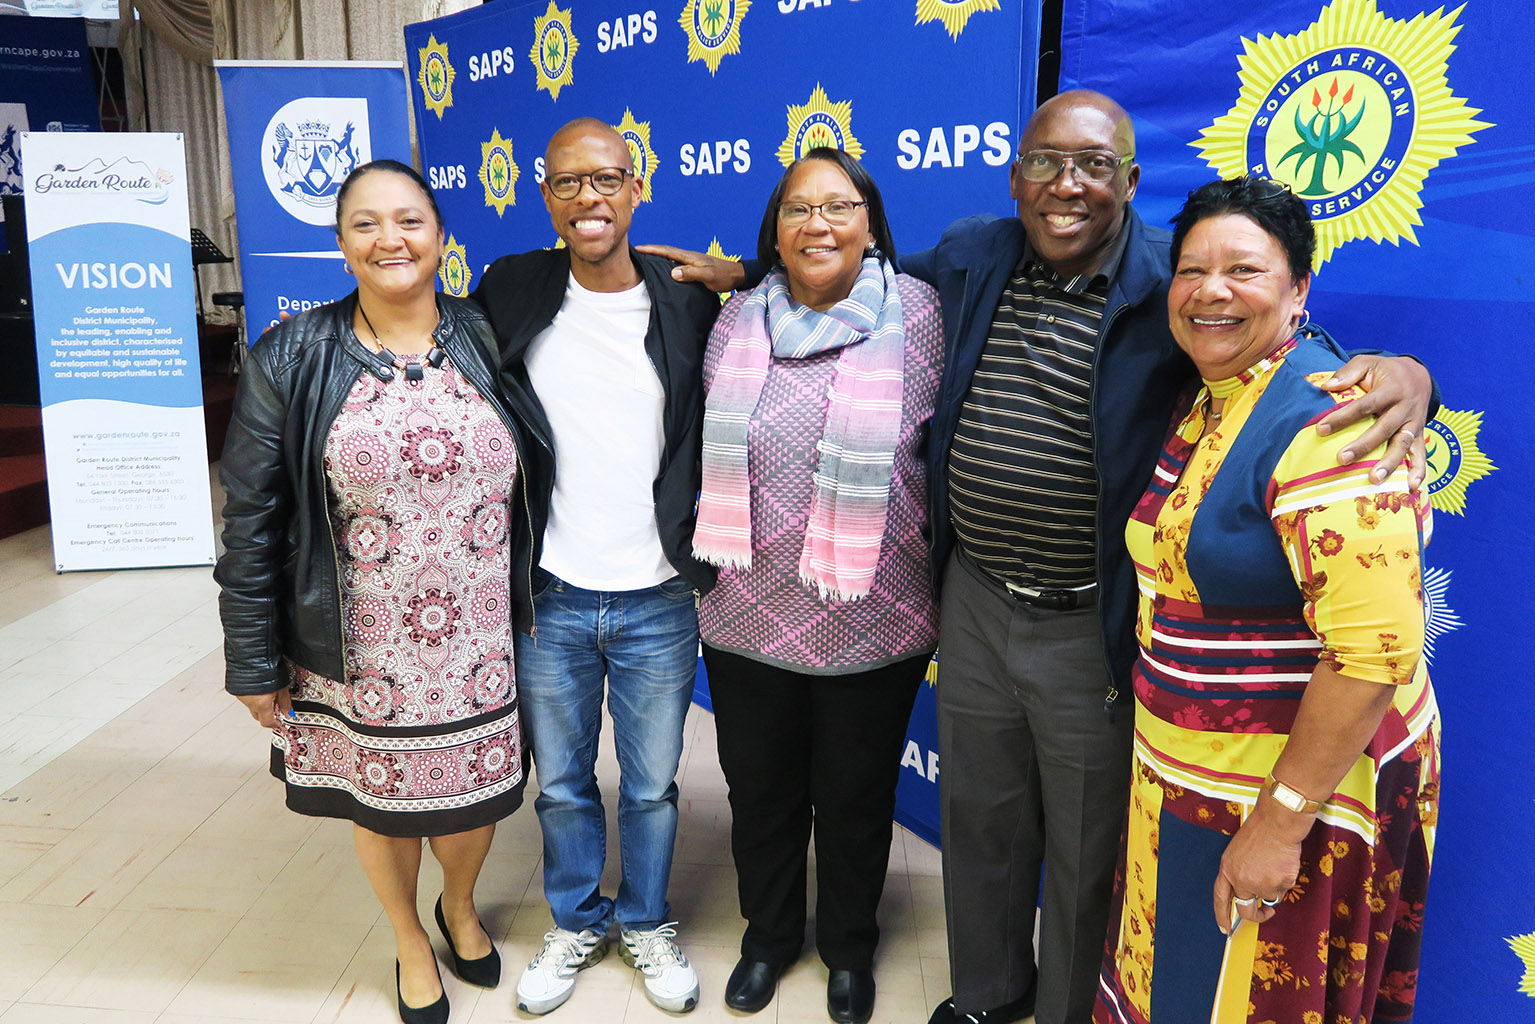 Driving Change Through Community Safety And Welfare Garden Route District Municipality